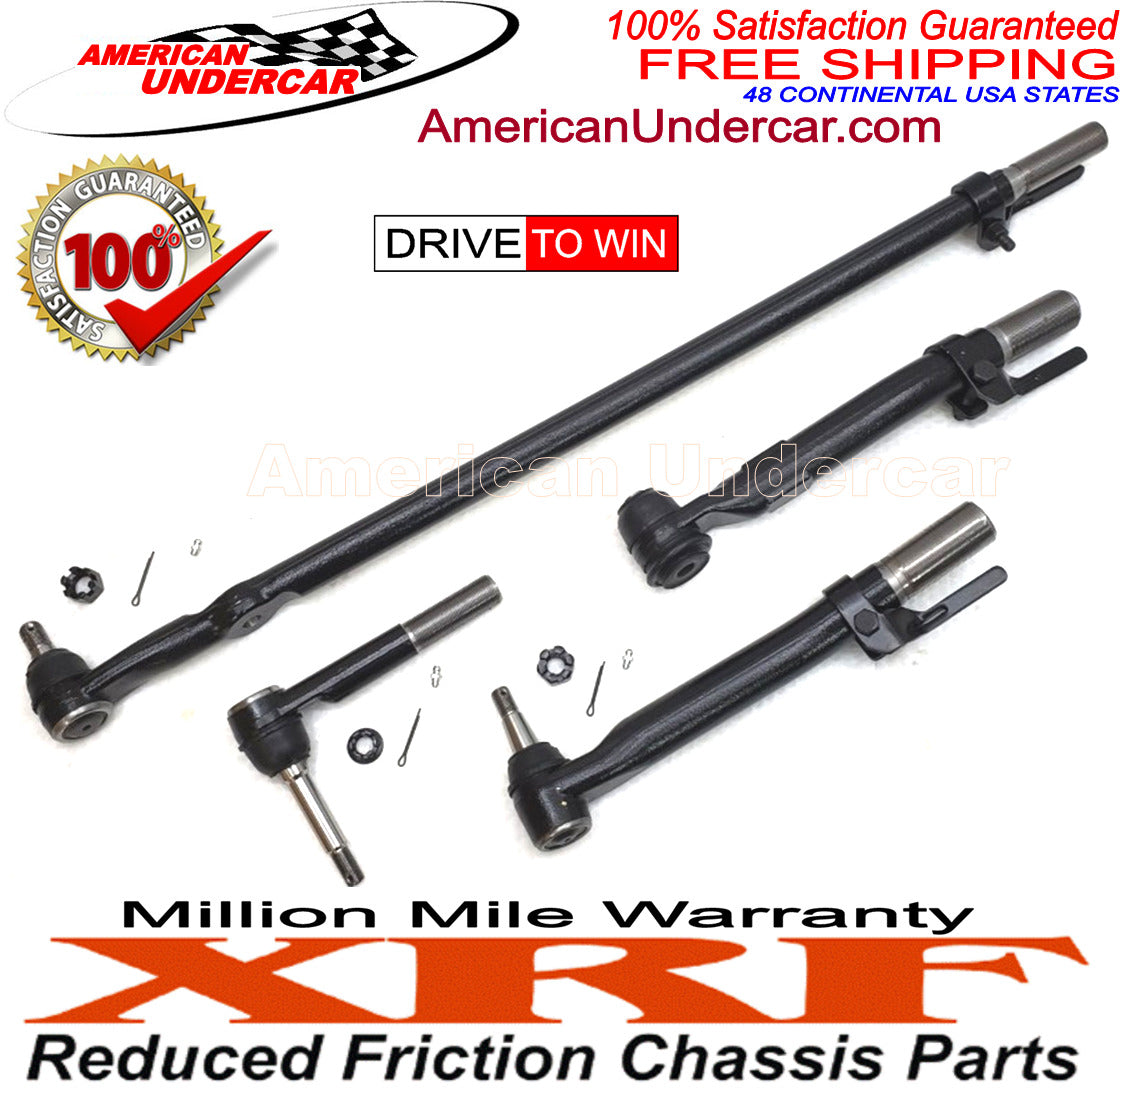 XRF Ford F250 Super Duty Tie Rod Steering and Suspension Kit 2005 - 2010 4x4